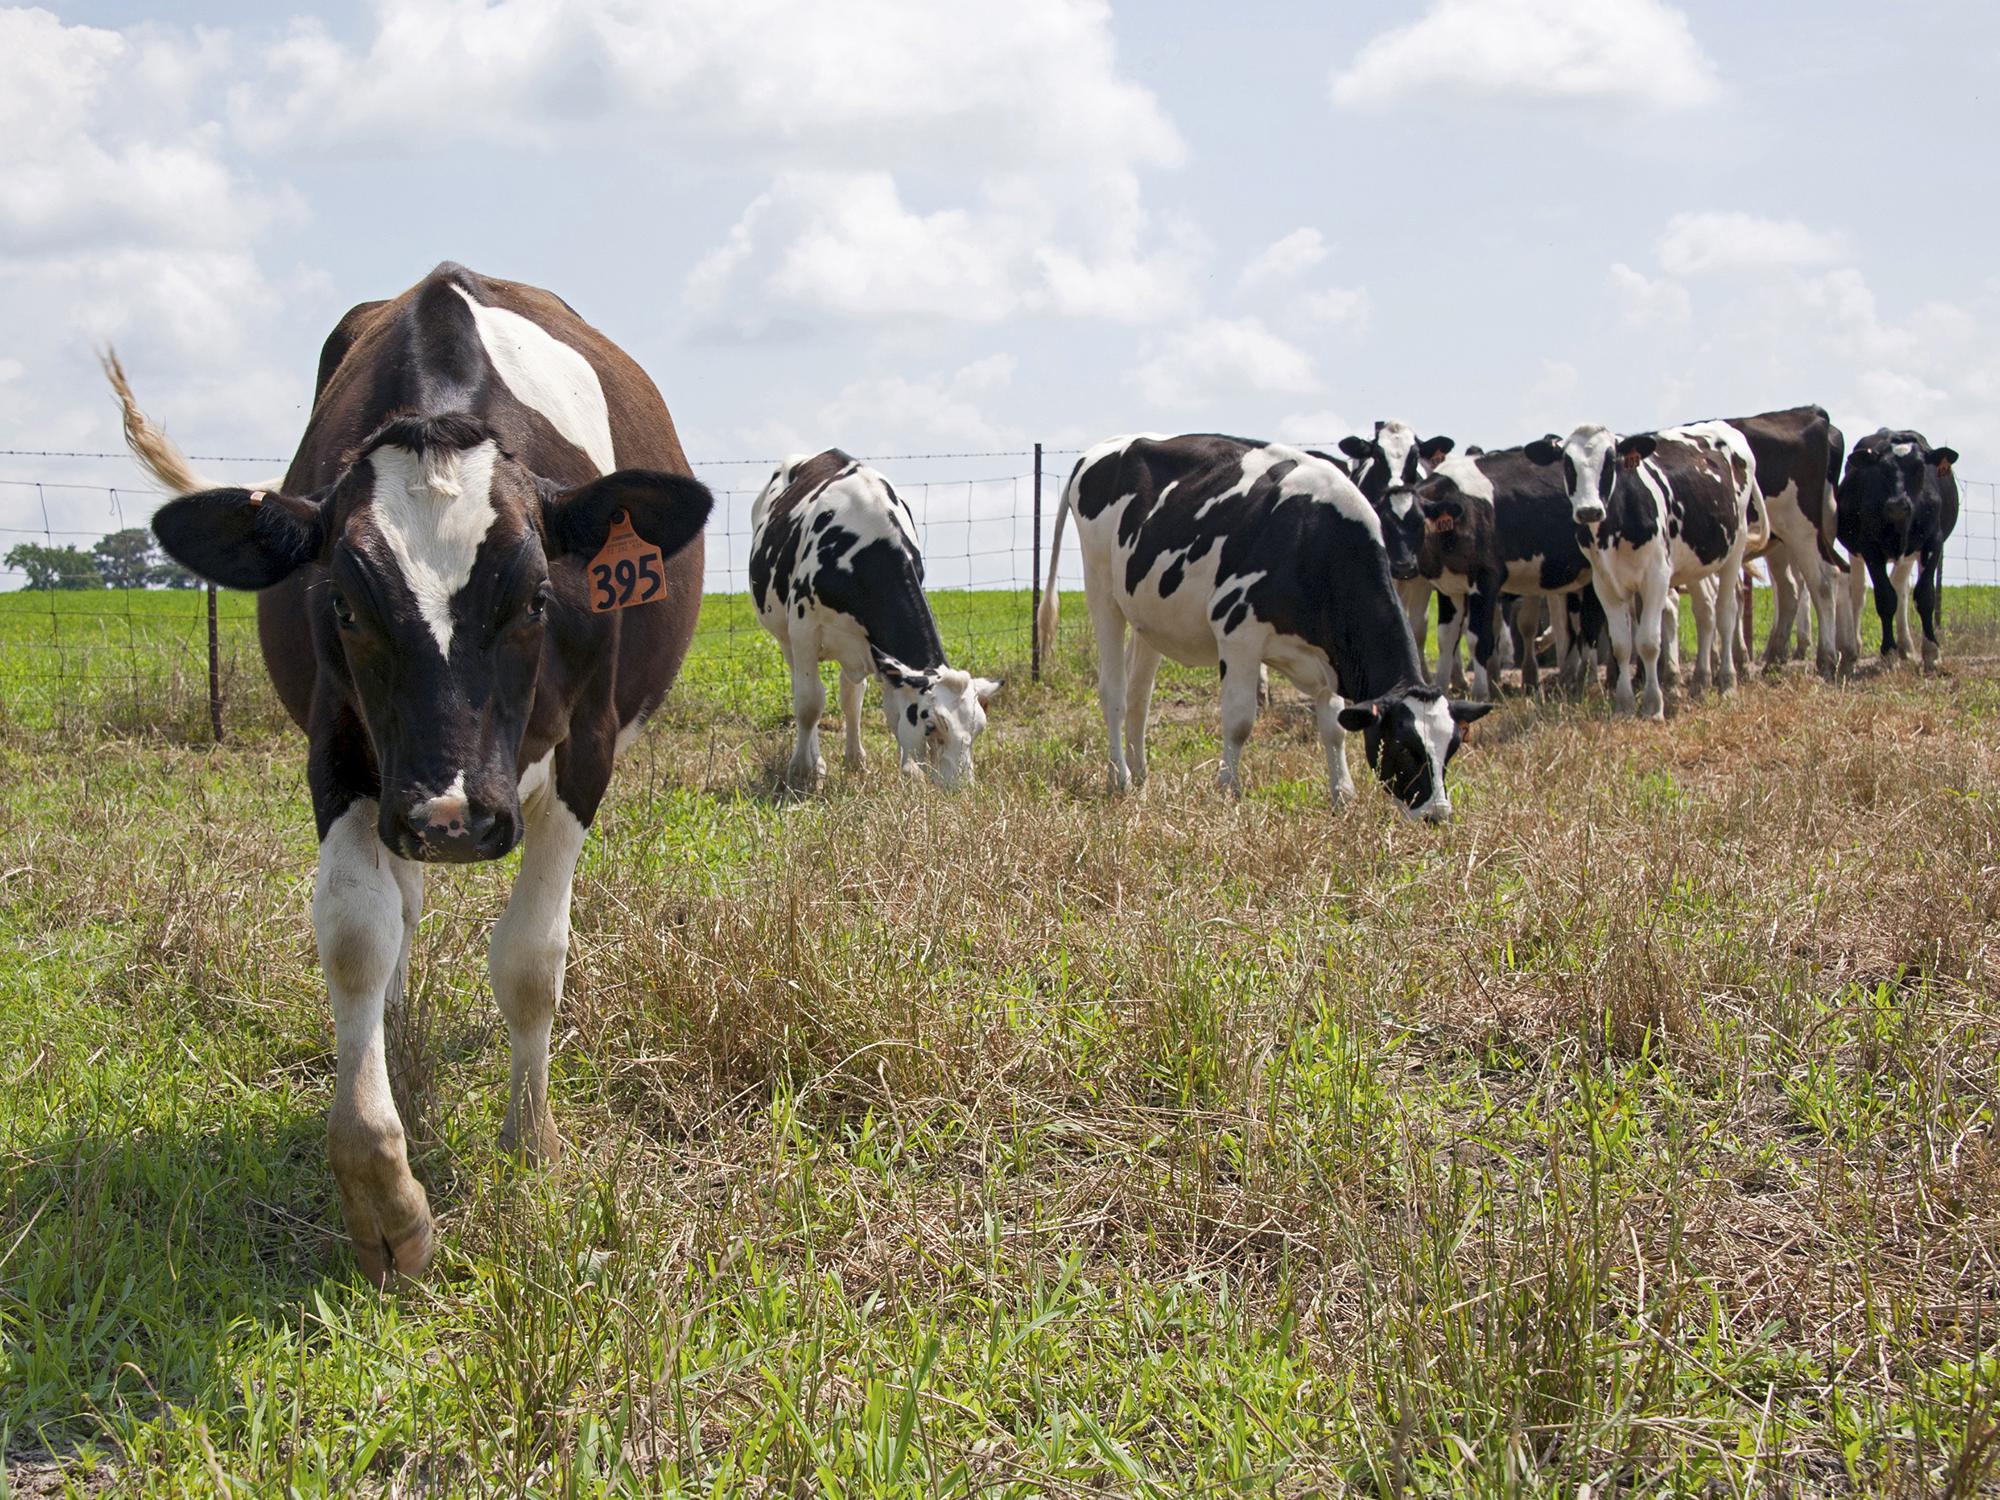 Holstein cows graze at the Joe Bearden Dairy Research Center in Sessums, Mississippi, on June 11, 2015. Increased production and international competition are bringing down milk prices for dairy producers across the state. (Photo by MSU Ag Communications/Kat Lawrence)